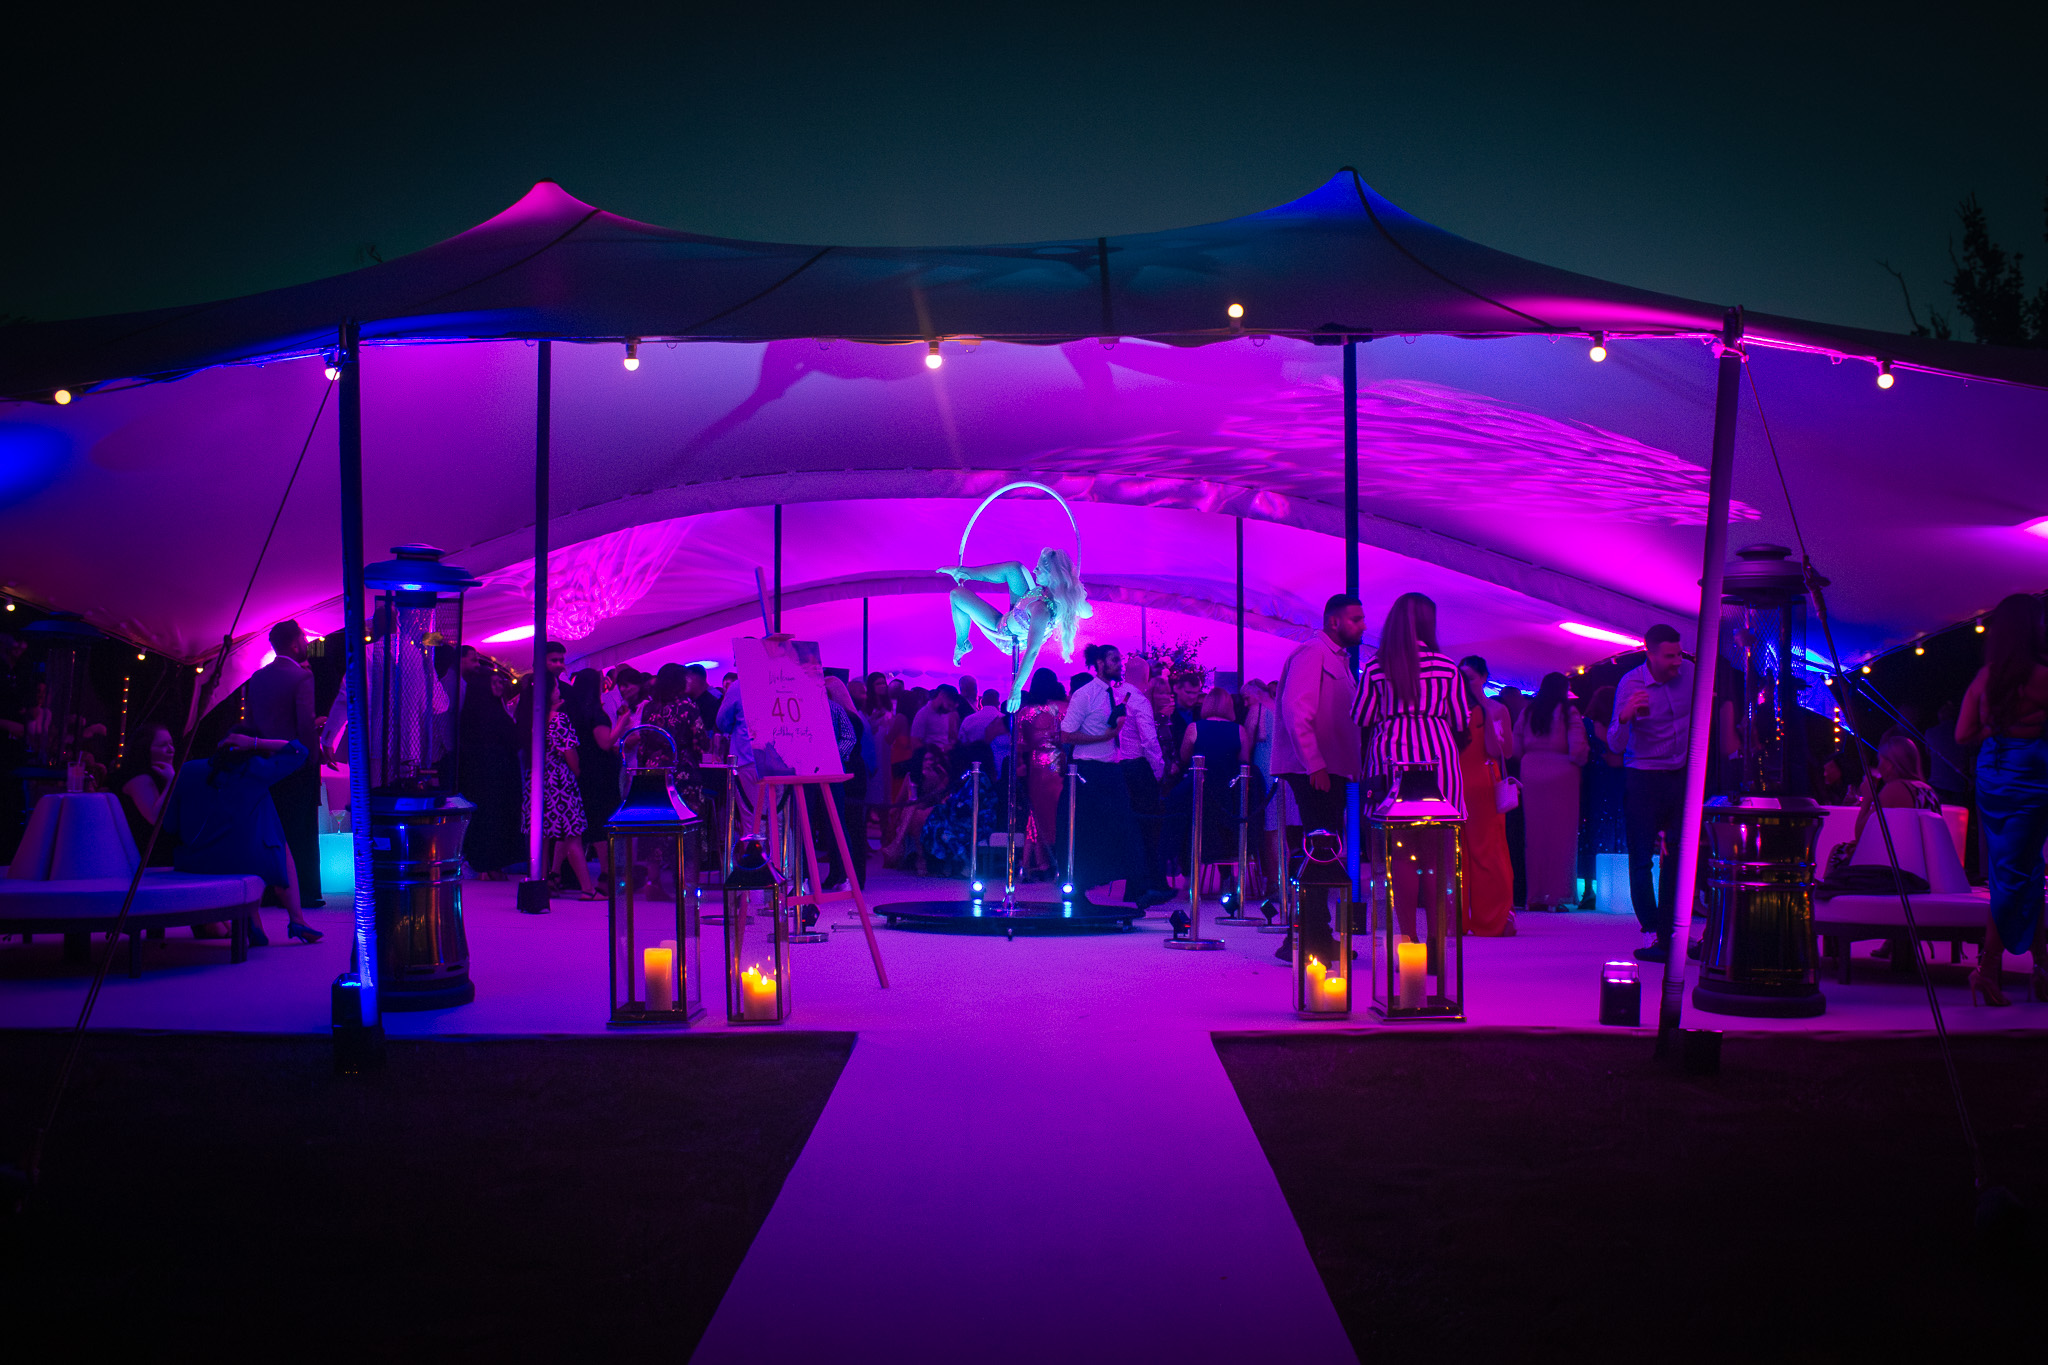 Want Mobile Bars for Events in Marquees?